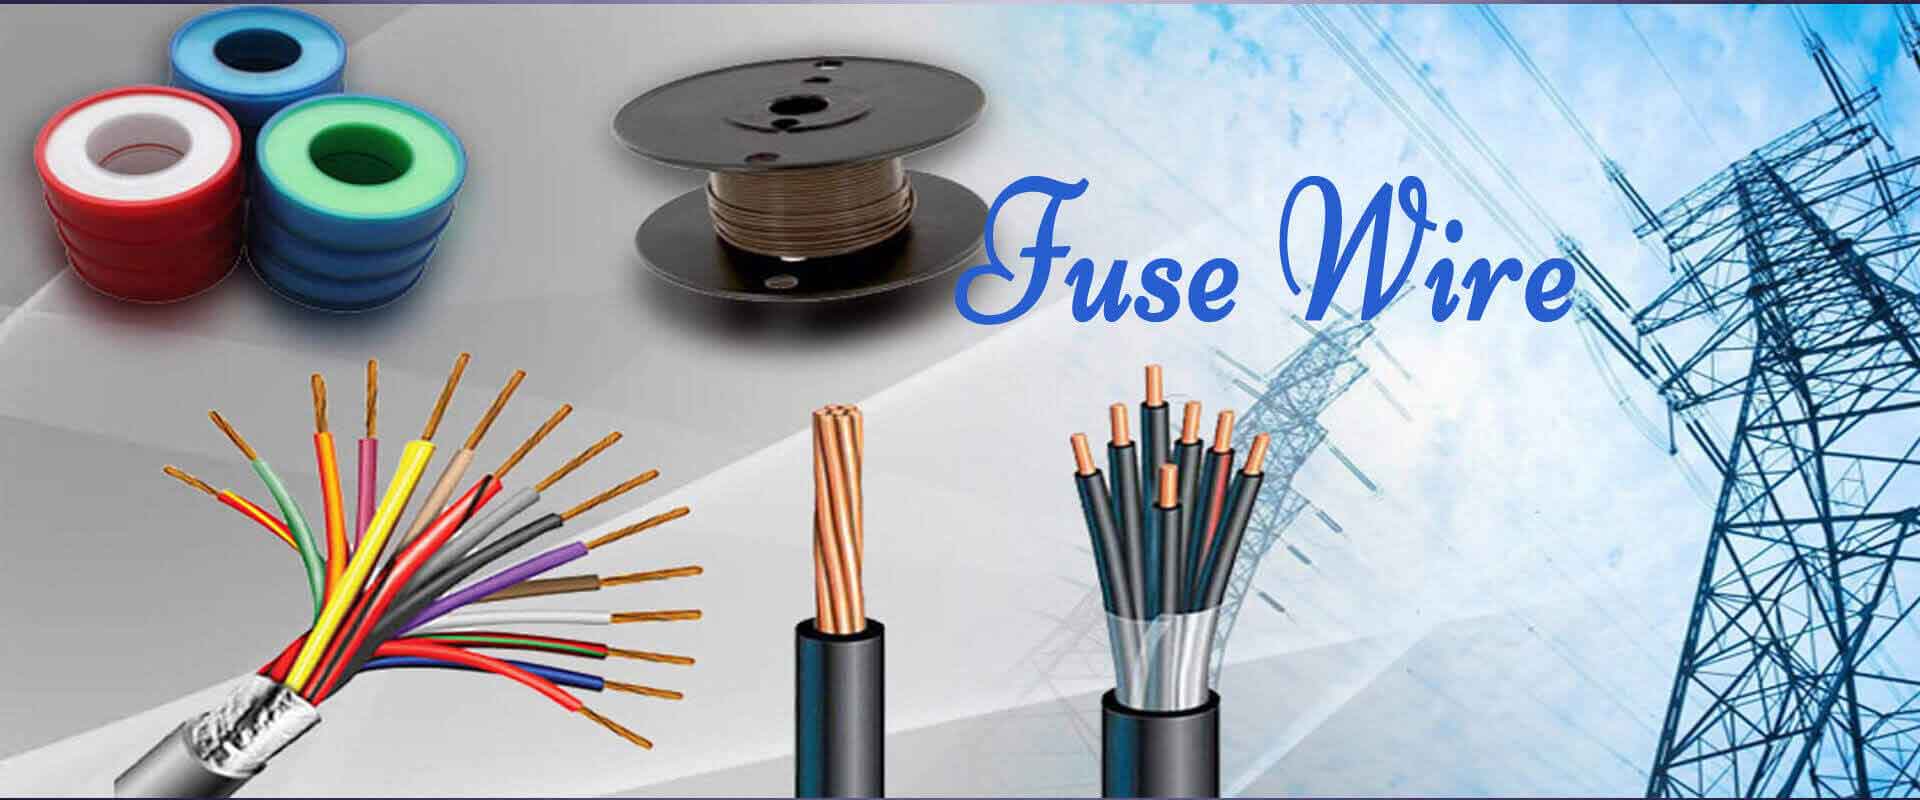 Silver Plated Copper Wire For Fuse In Karbi Anglong